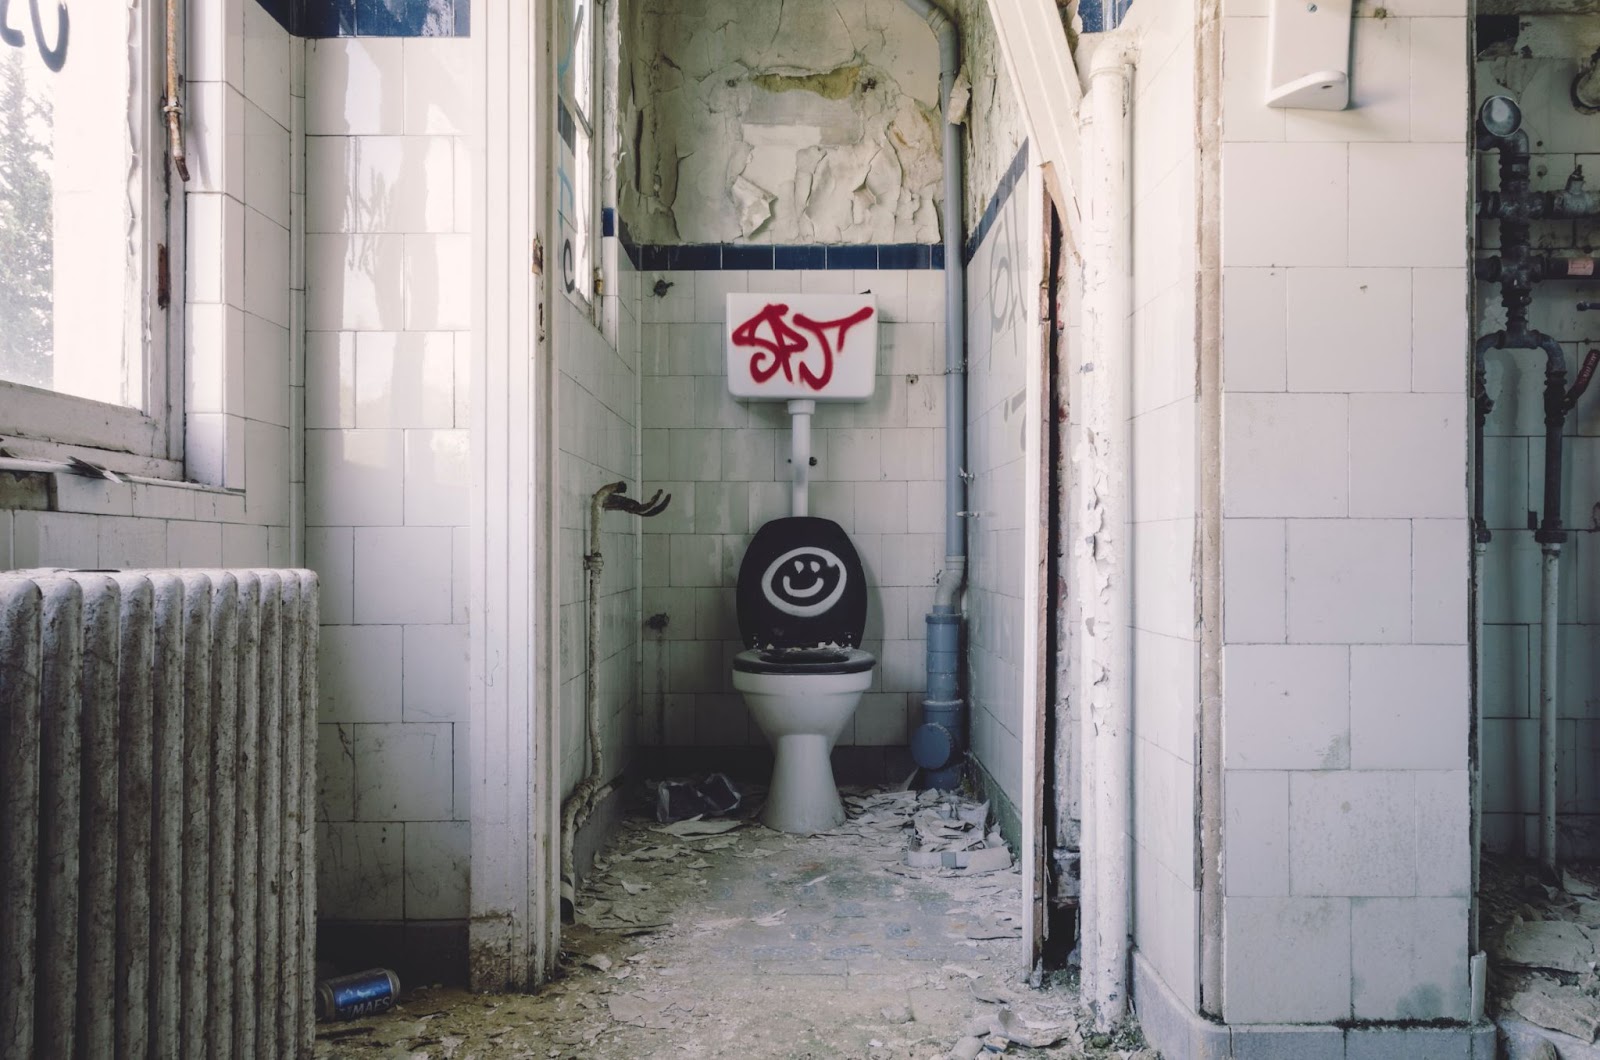 A bathroom with a smiley face painted on the toilet seat